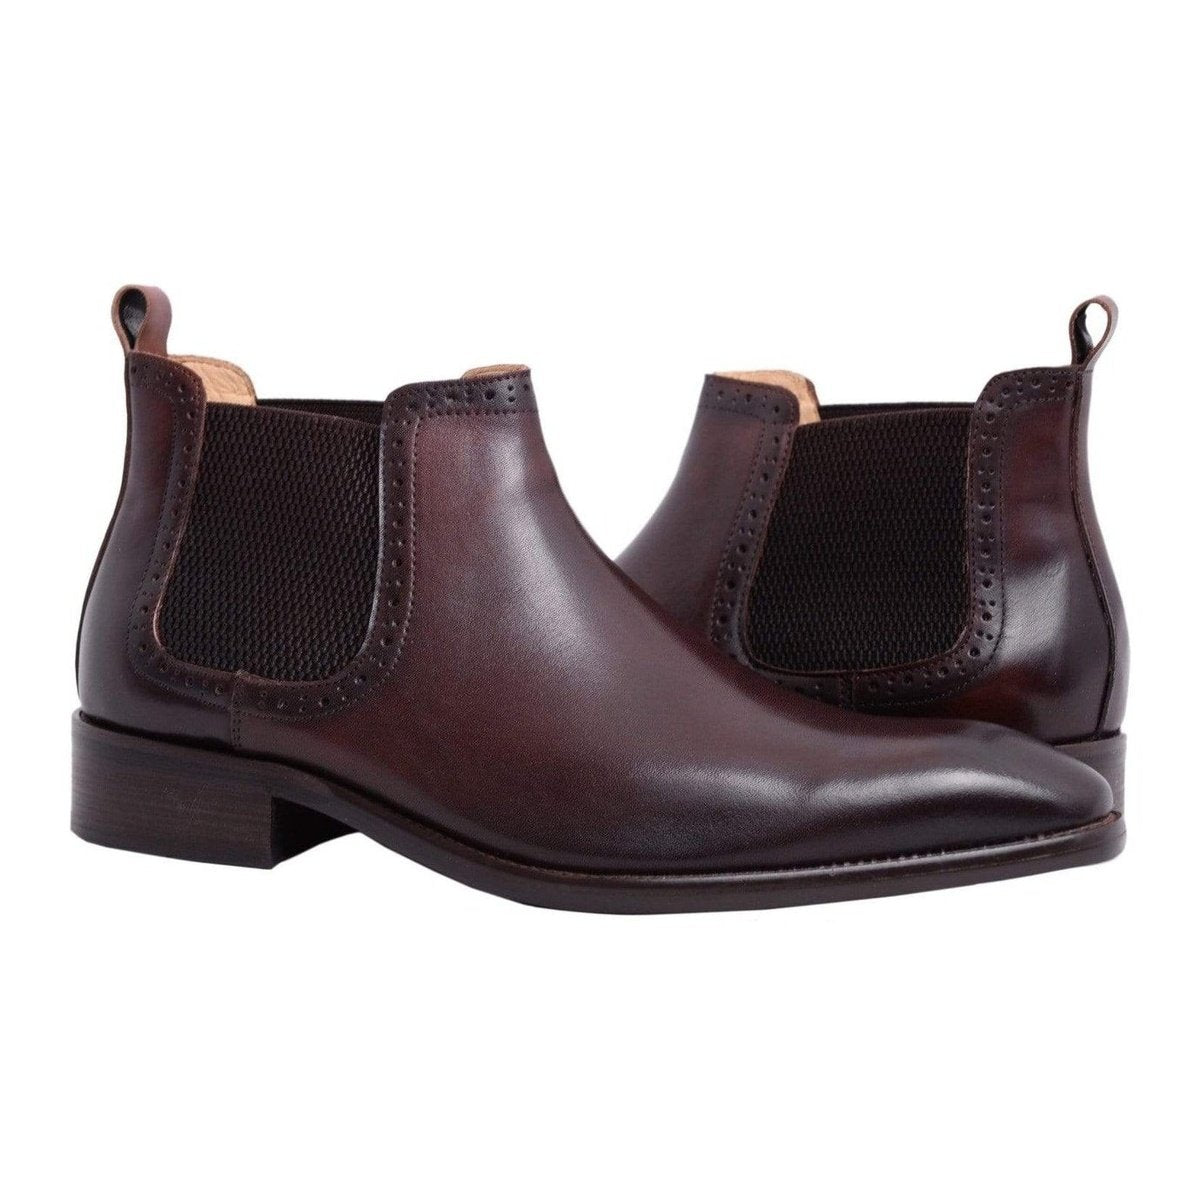 Carrucci 9.5 Carrucci Mens Chestnut Brown Slip-on Chelsea Leather Dress Boots